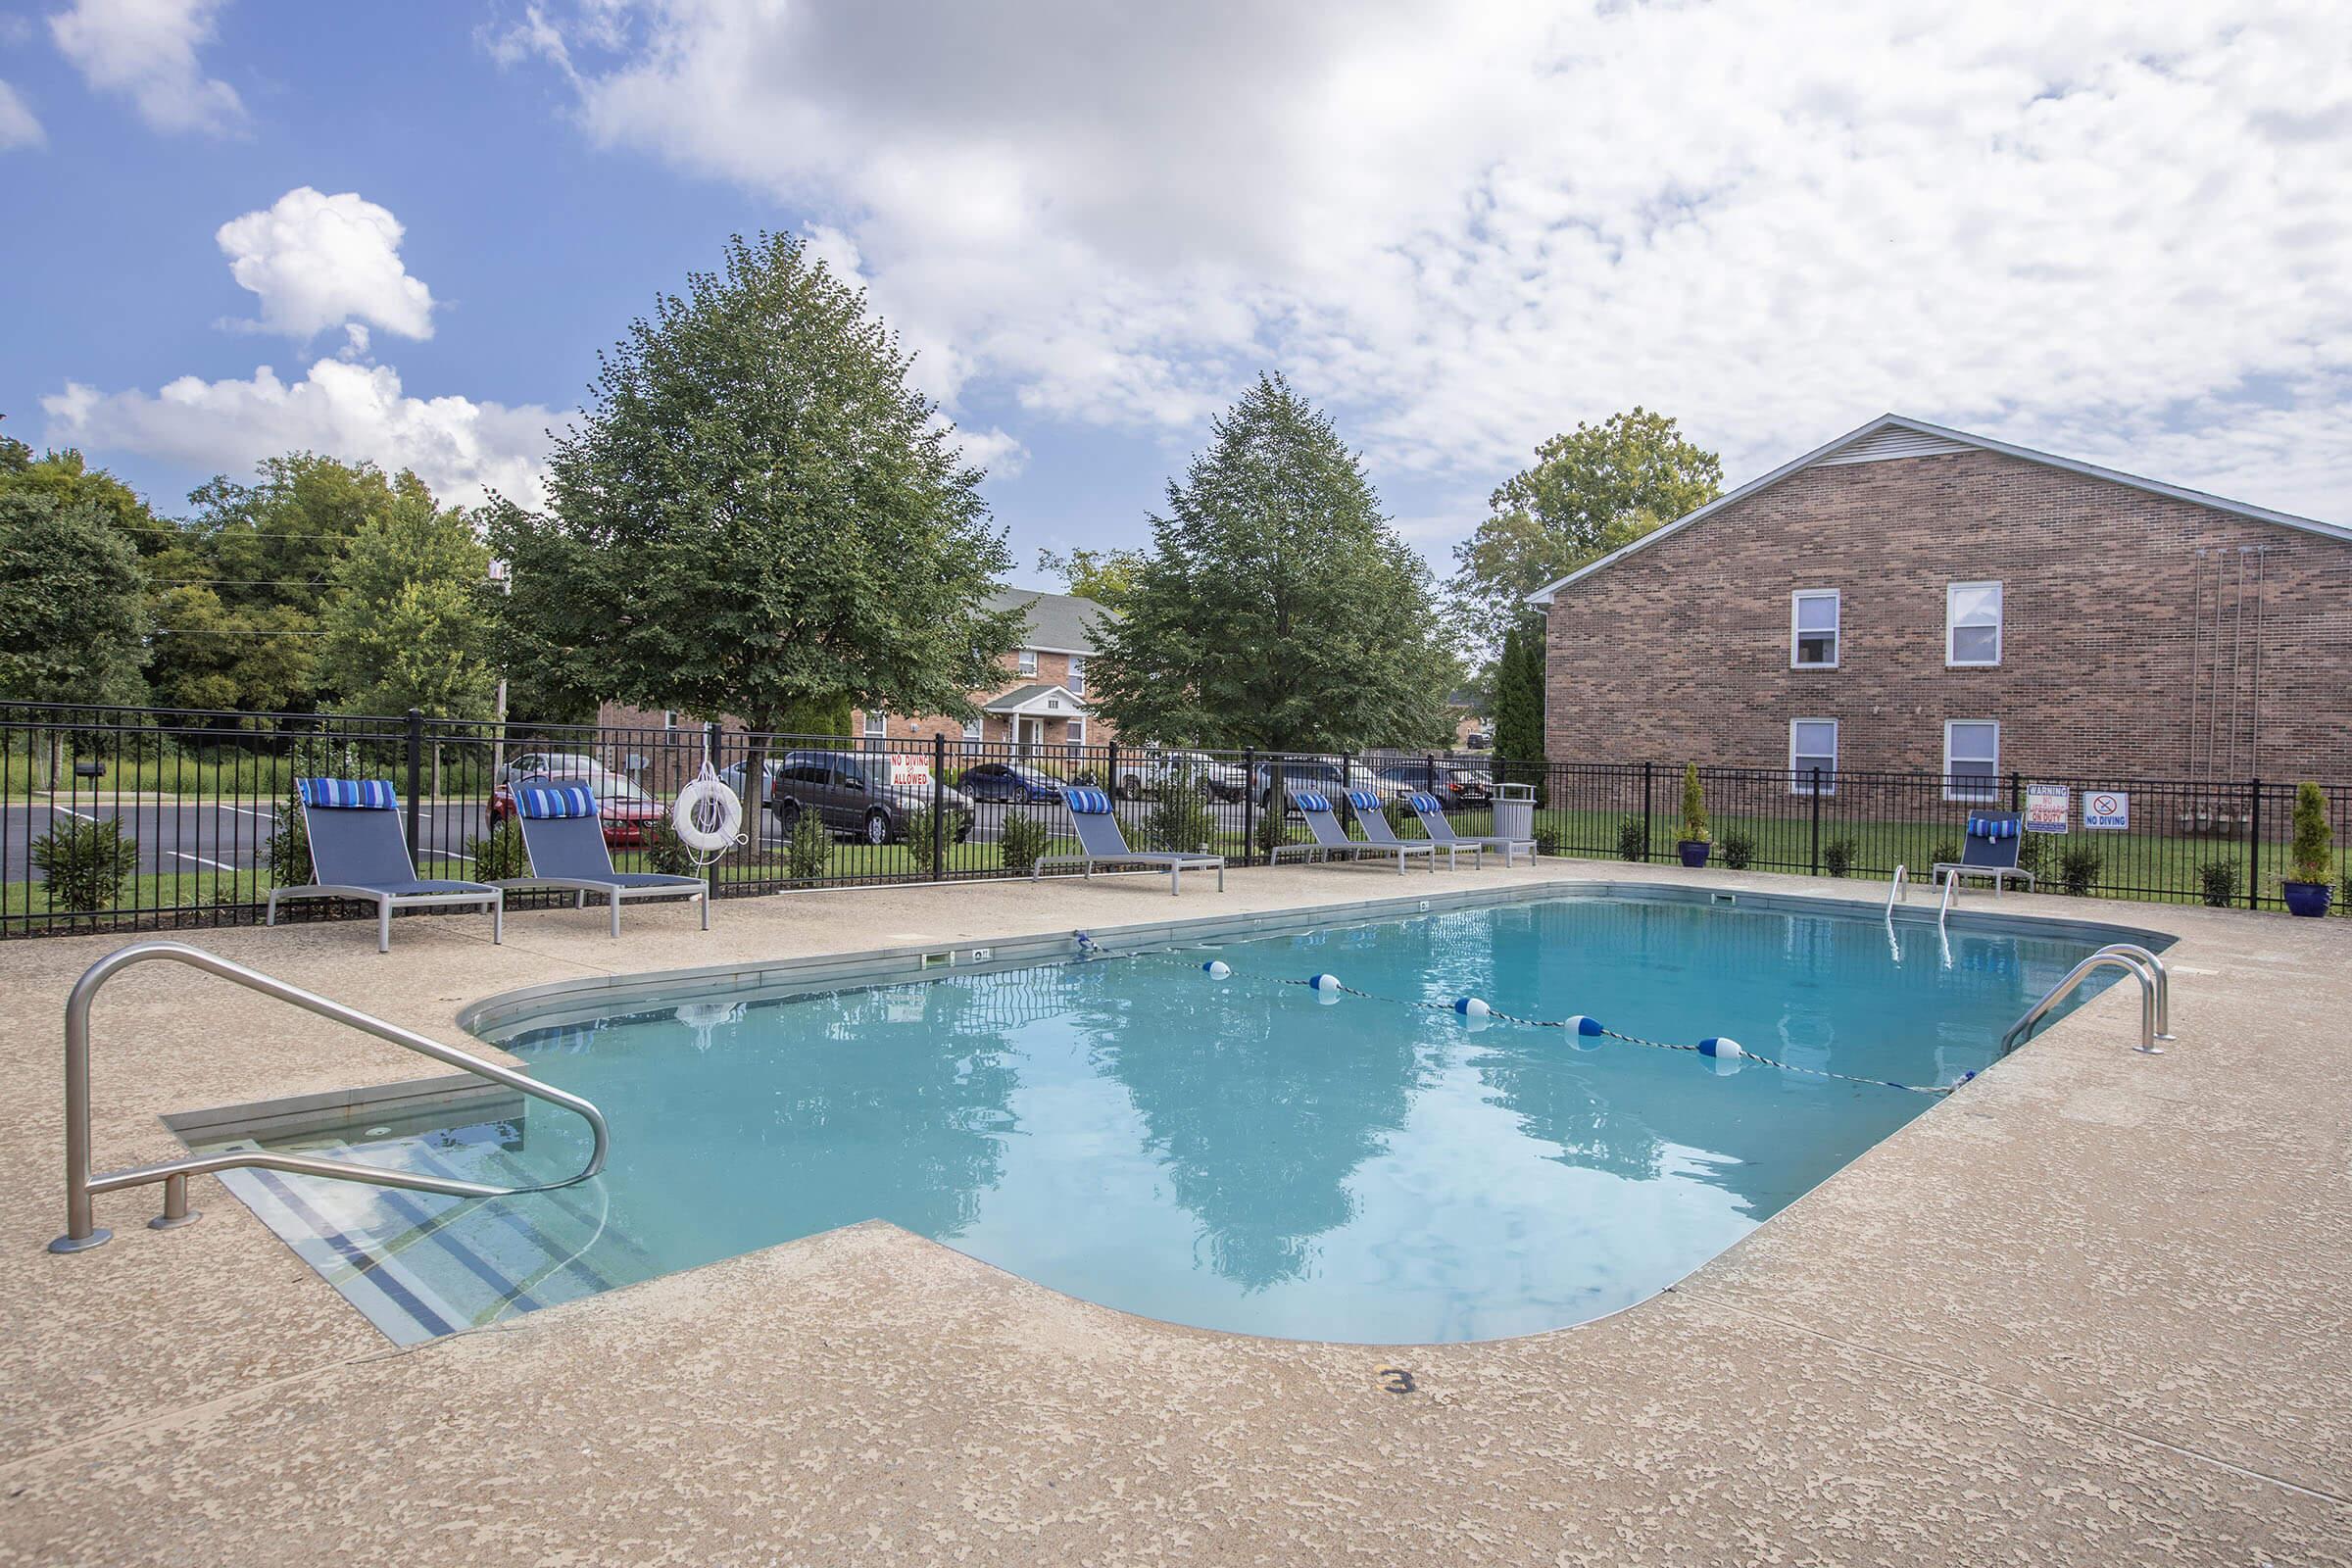 REFRESHING OASIS AT THE VILLAGES AT PEACHERS MILL